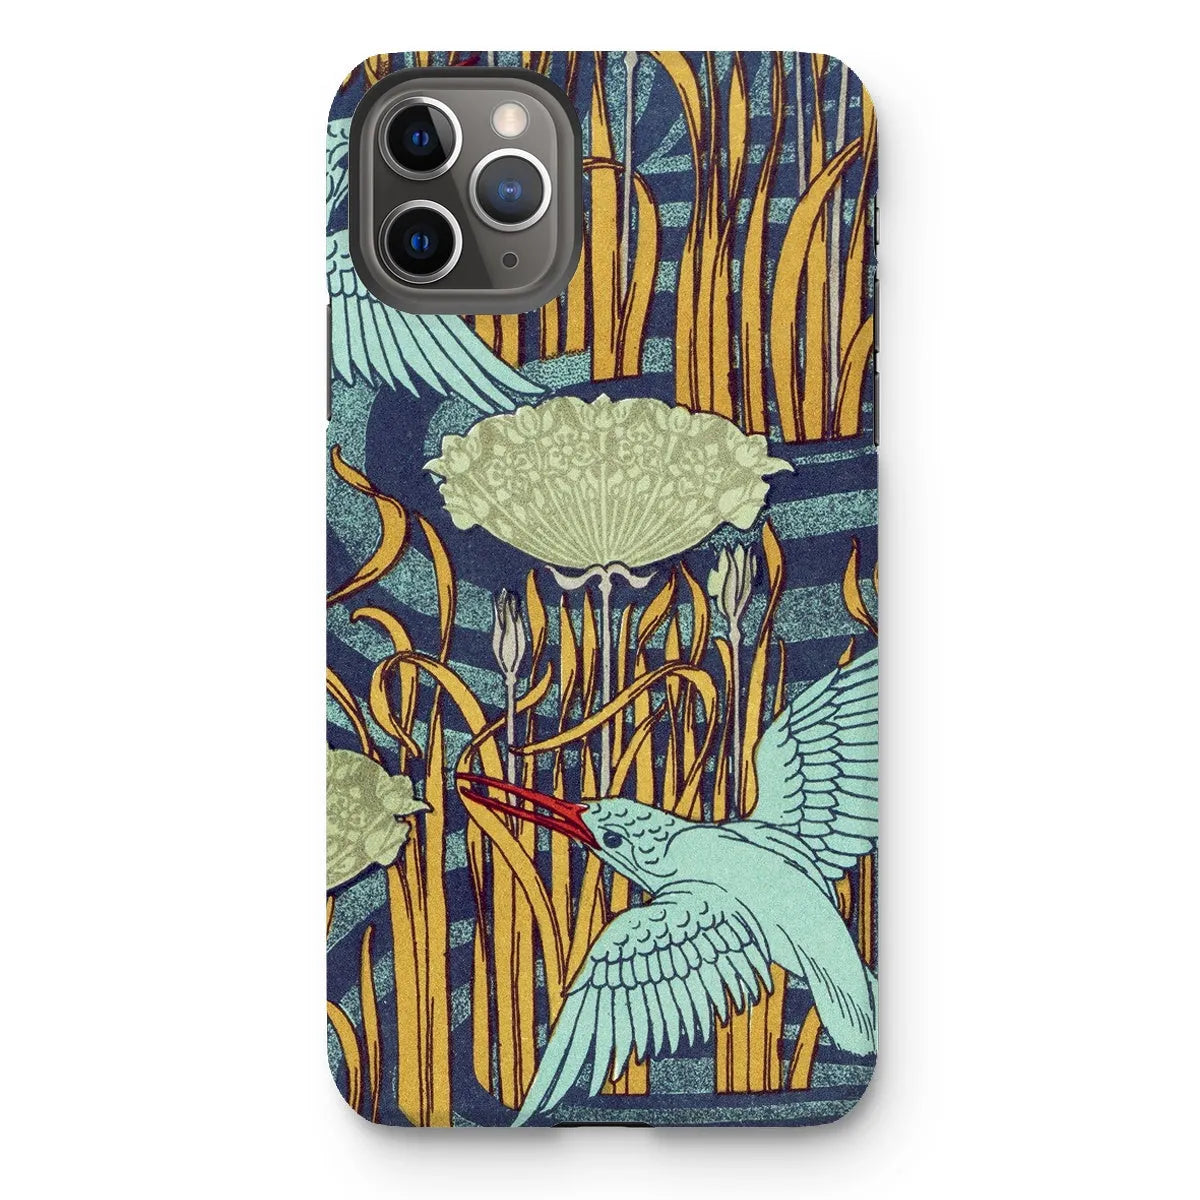 Kingfishers French Art Phone Case - Maurice Pillard Verneuil - Iphone 11 Pro Max / Matte - Mobile Phone Cases